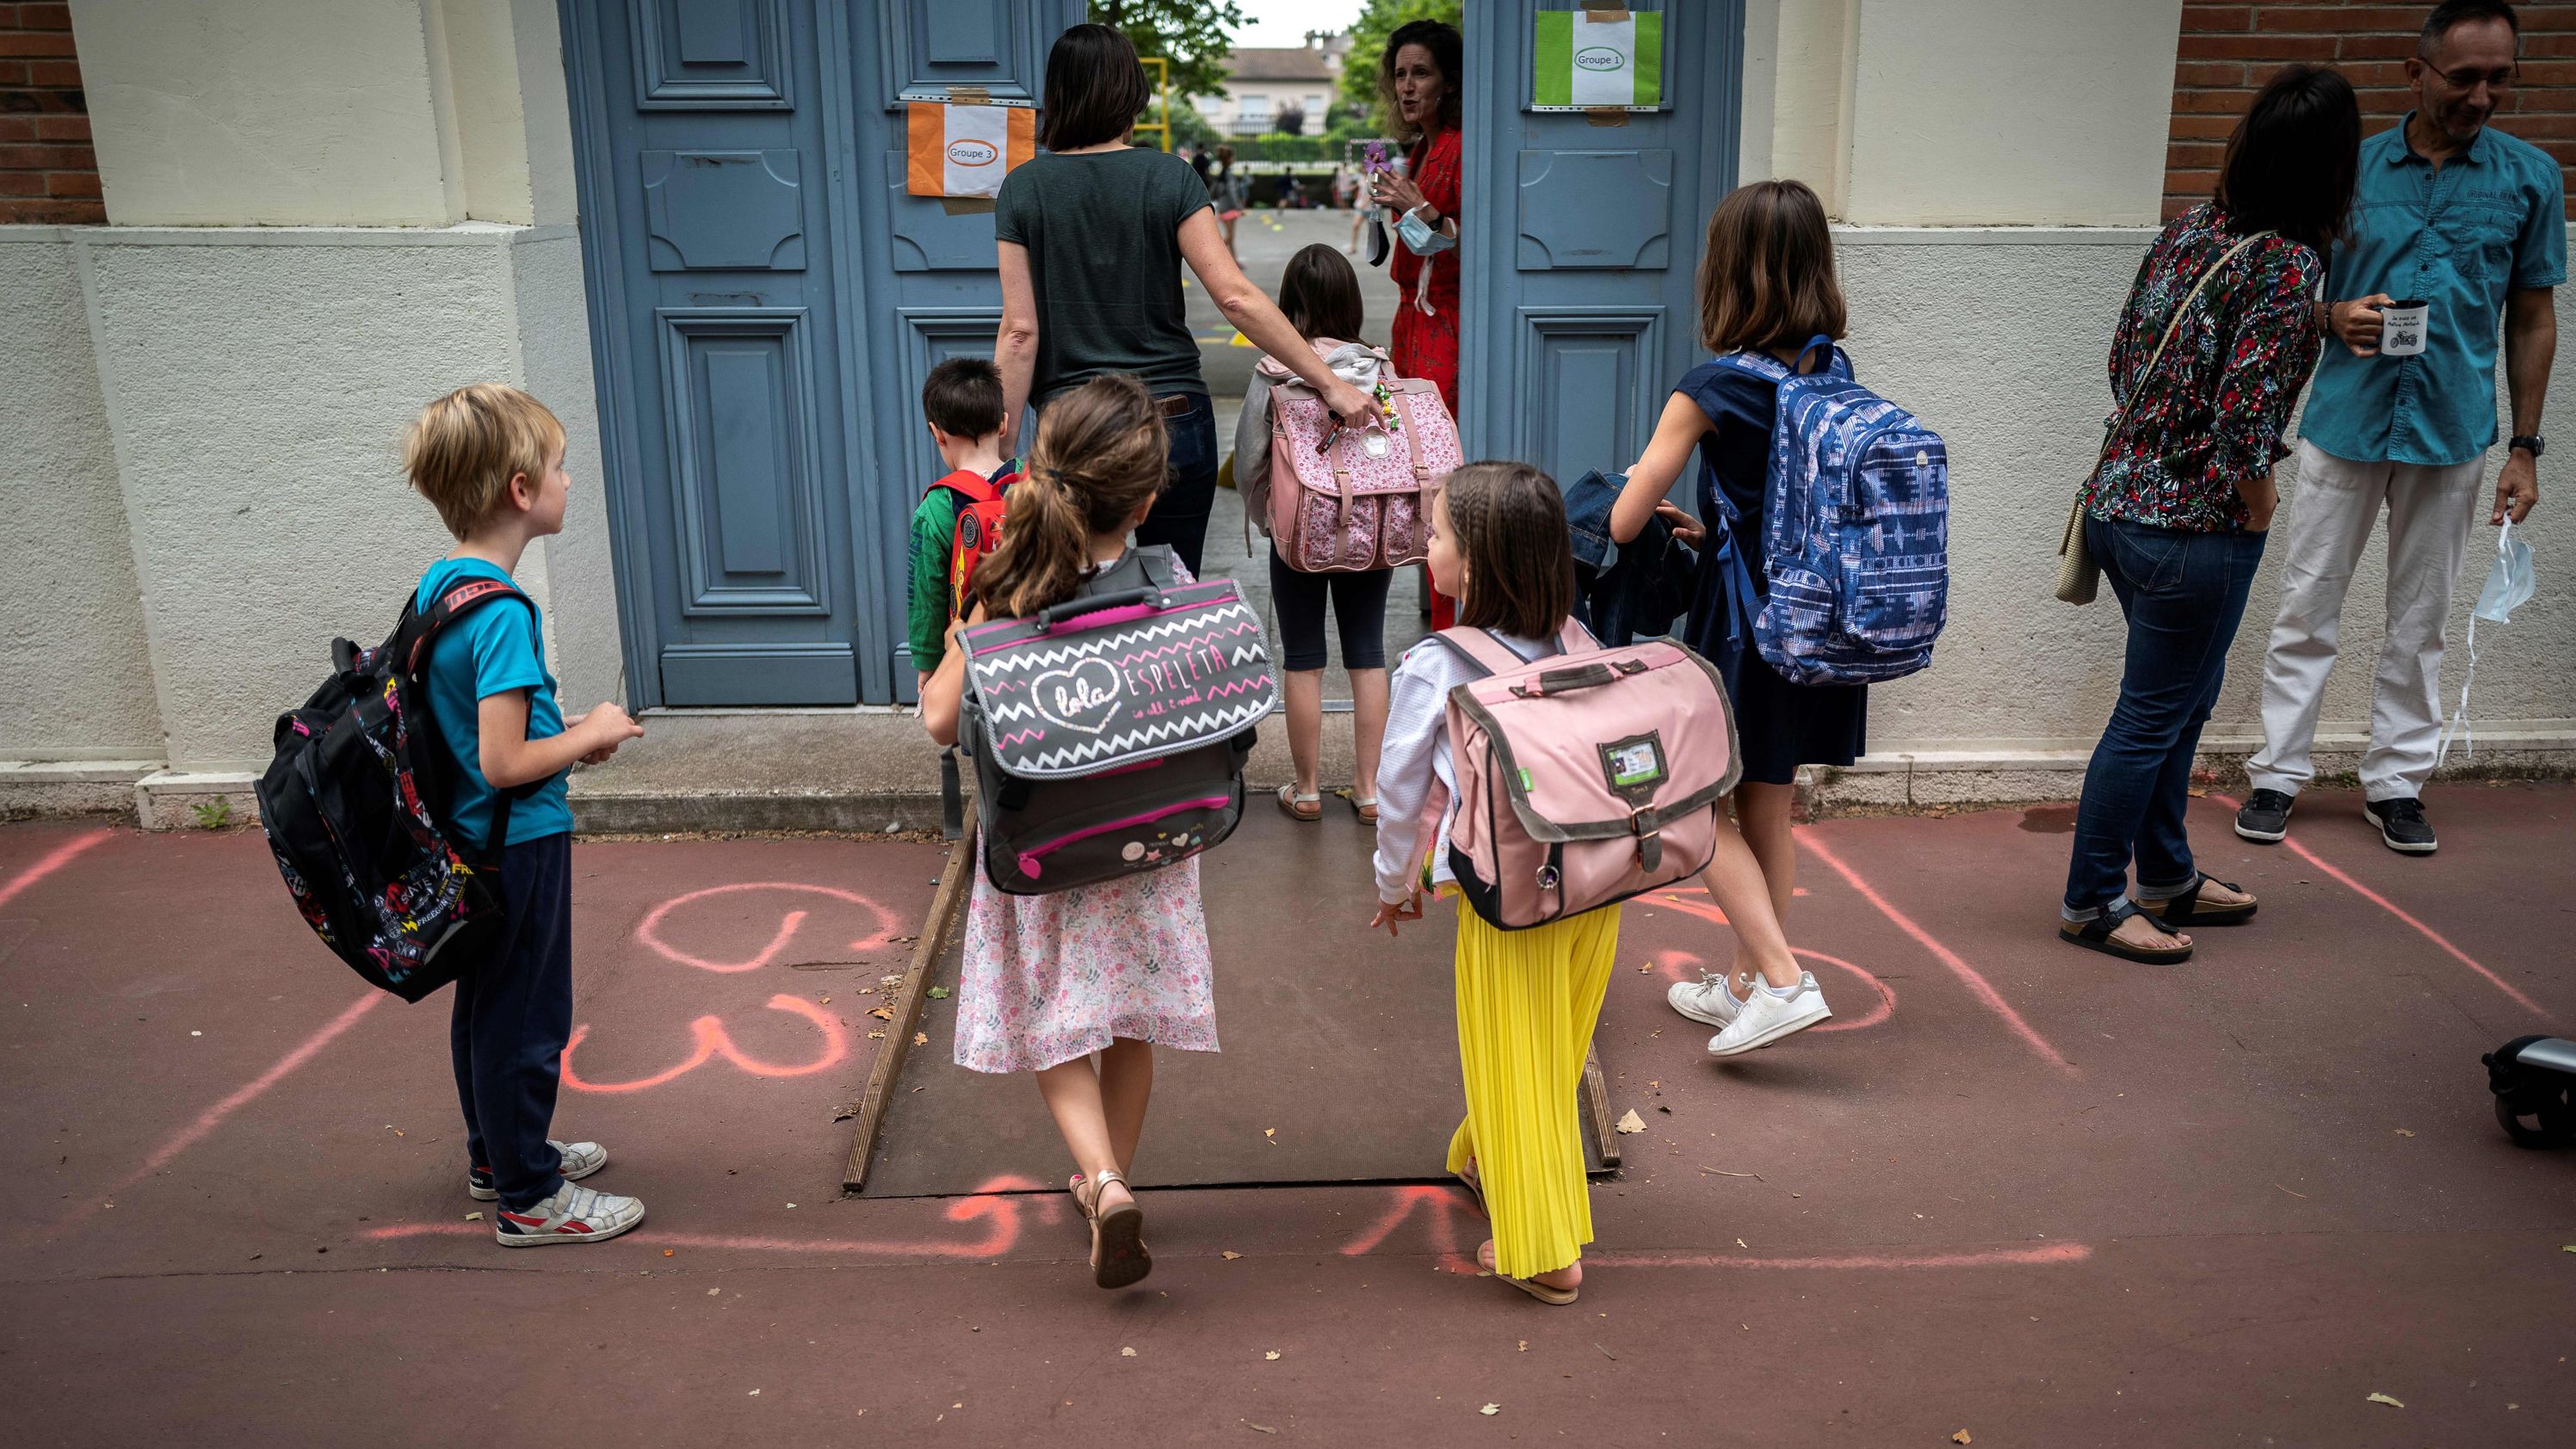 Children arrive at the Jules Julien Elementary School in Toulouse, France, on June 22.